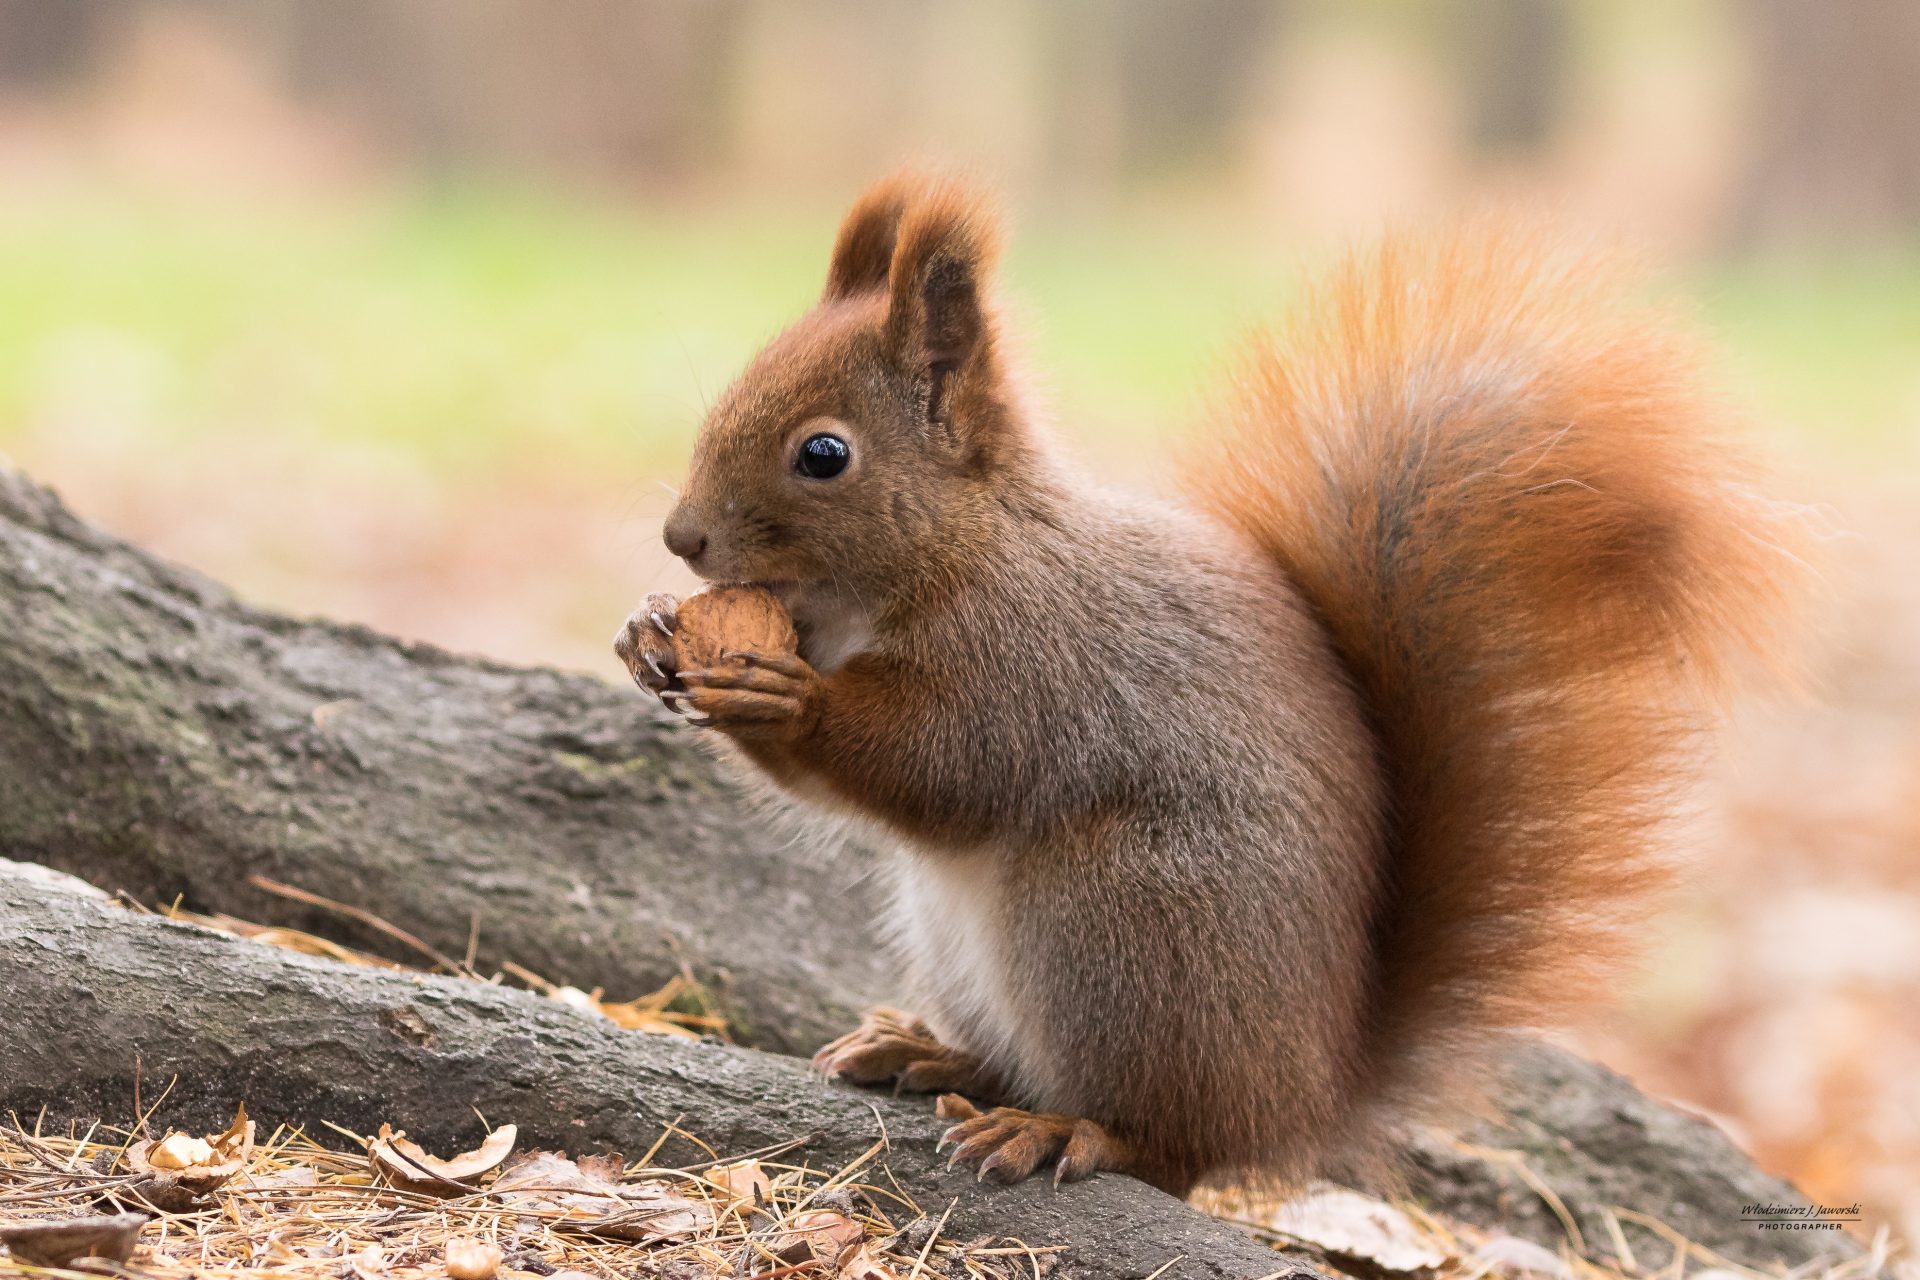 Celebrating Squirrel Appreciation Day: The ecological importance of squirrels.